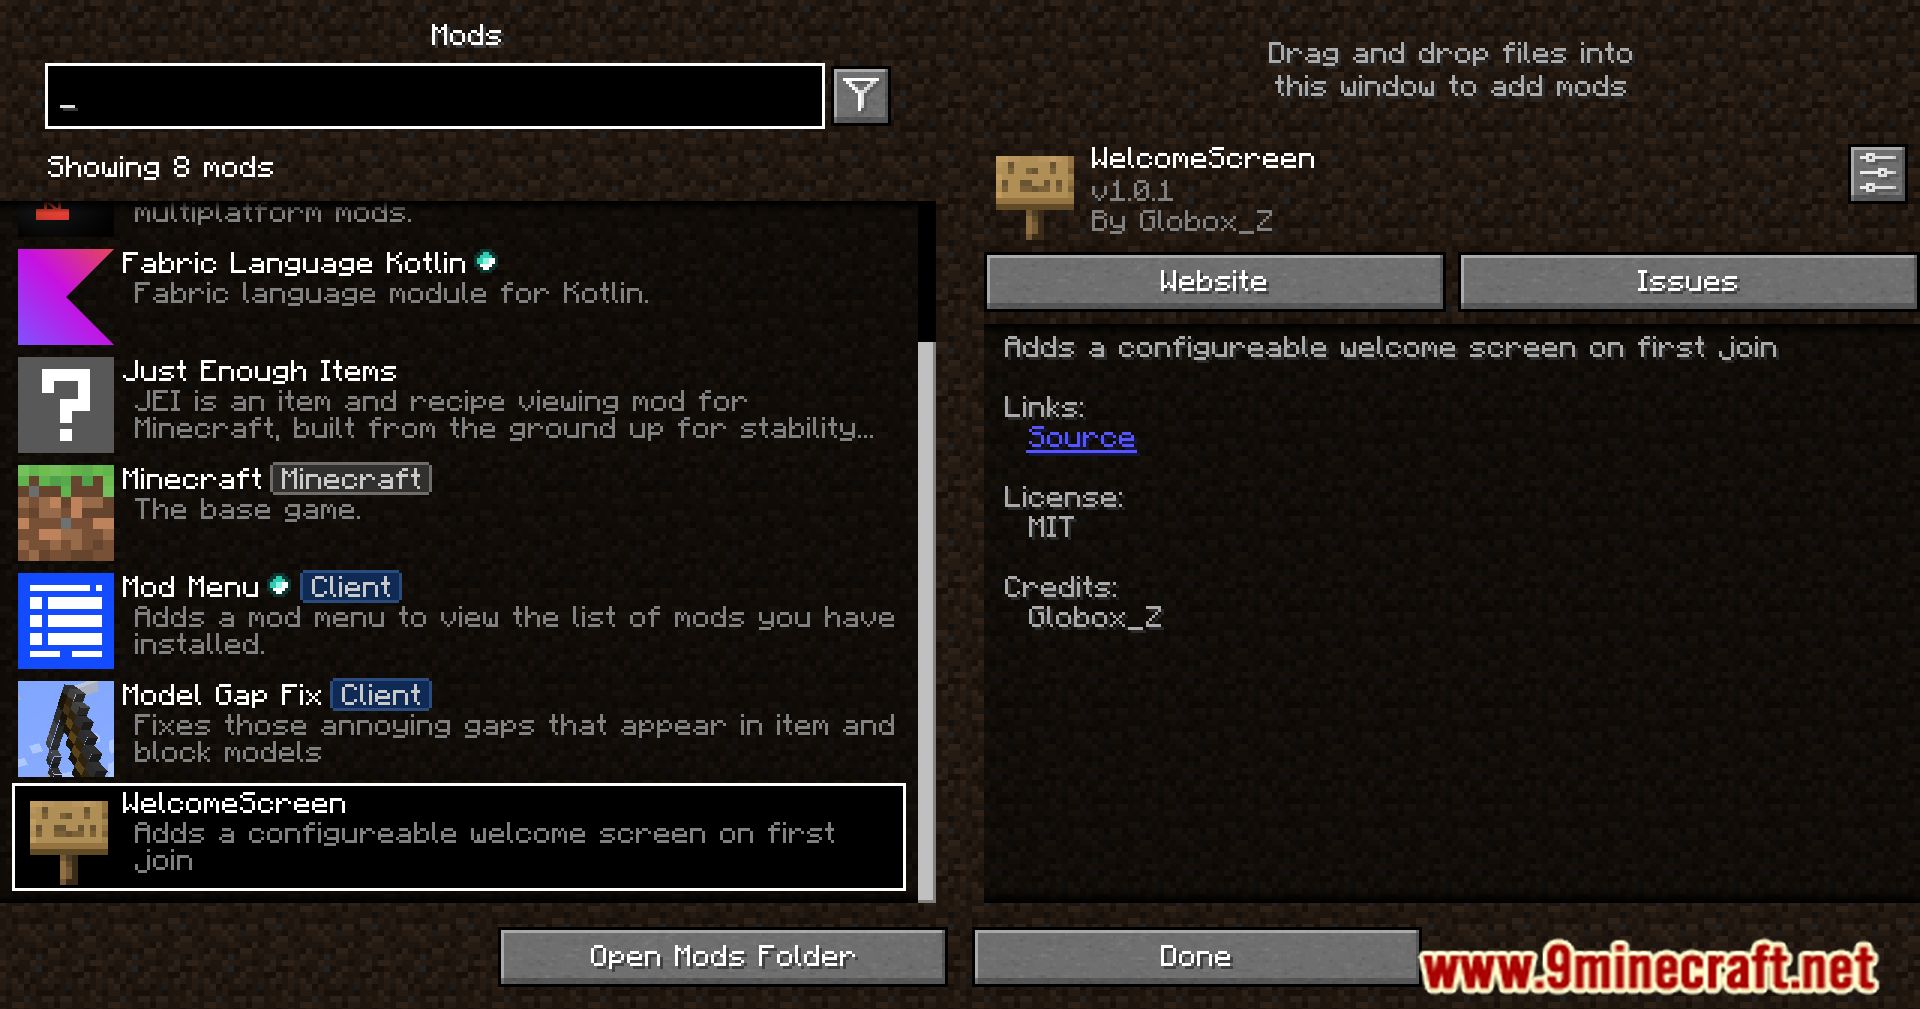 Welcome Screen Mod (1.21, 1.20.1) - Essential Information At First Join 2